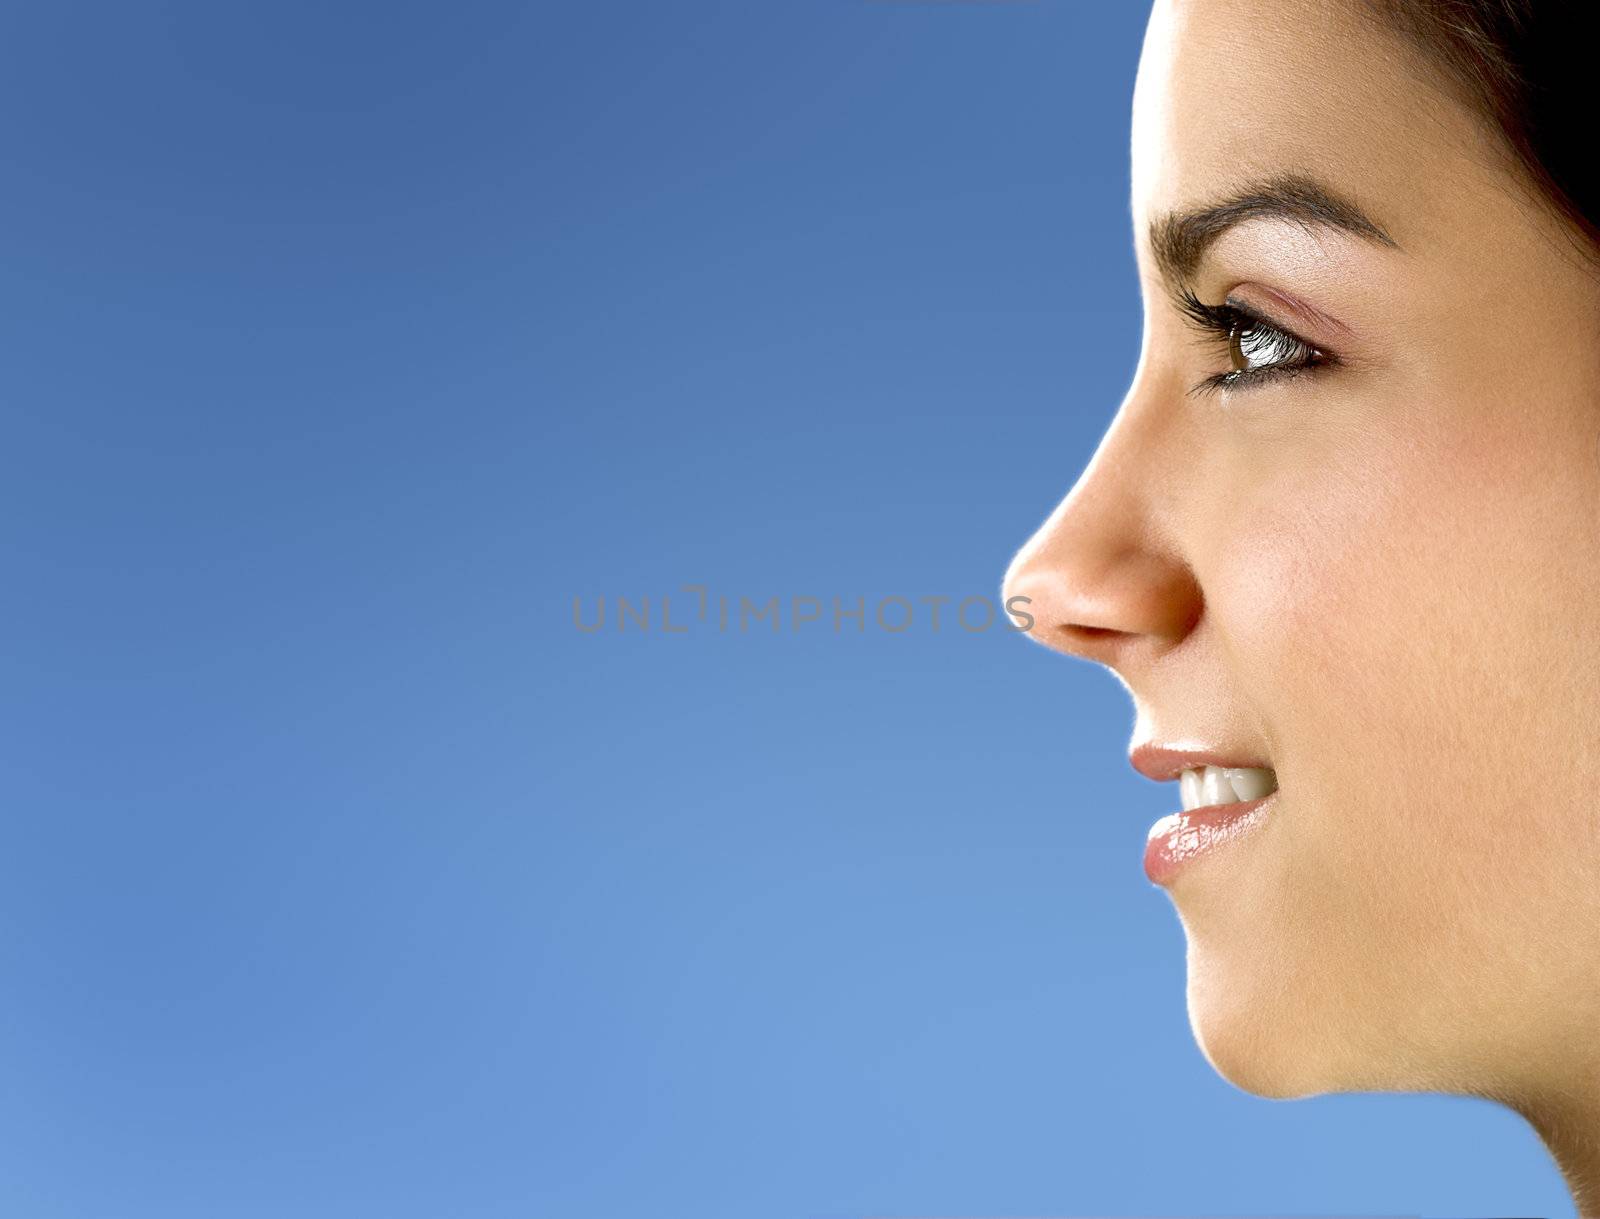 Profile portrait of a young and beautiful woman on a blue background